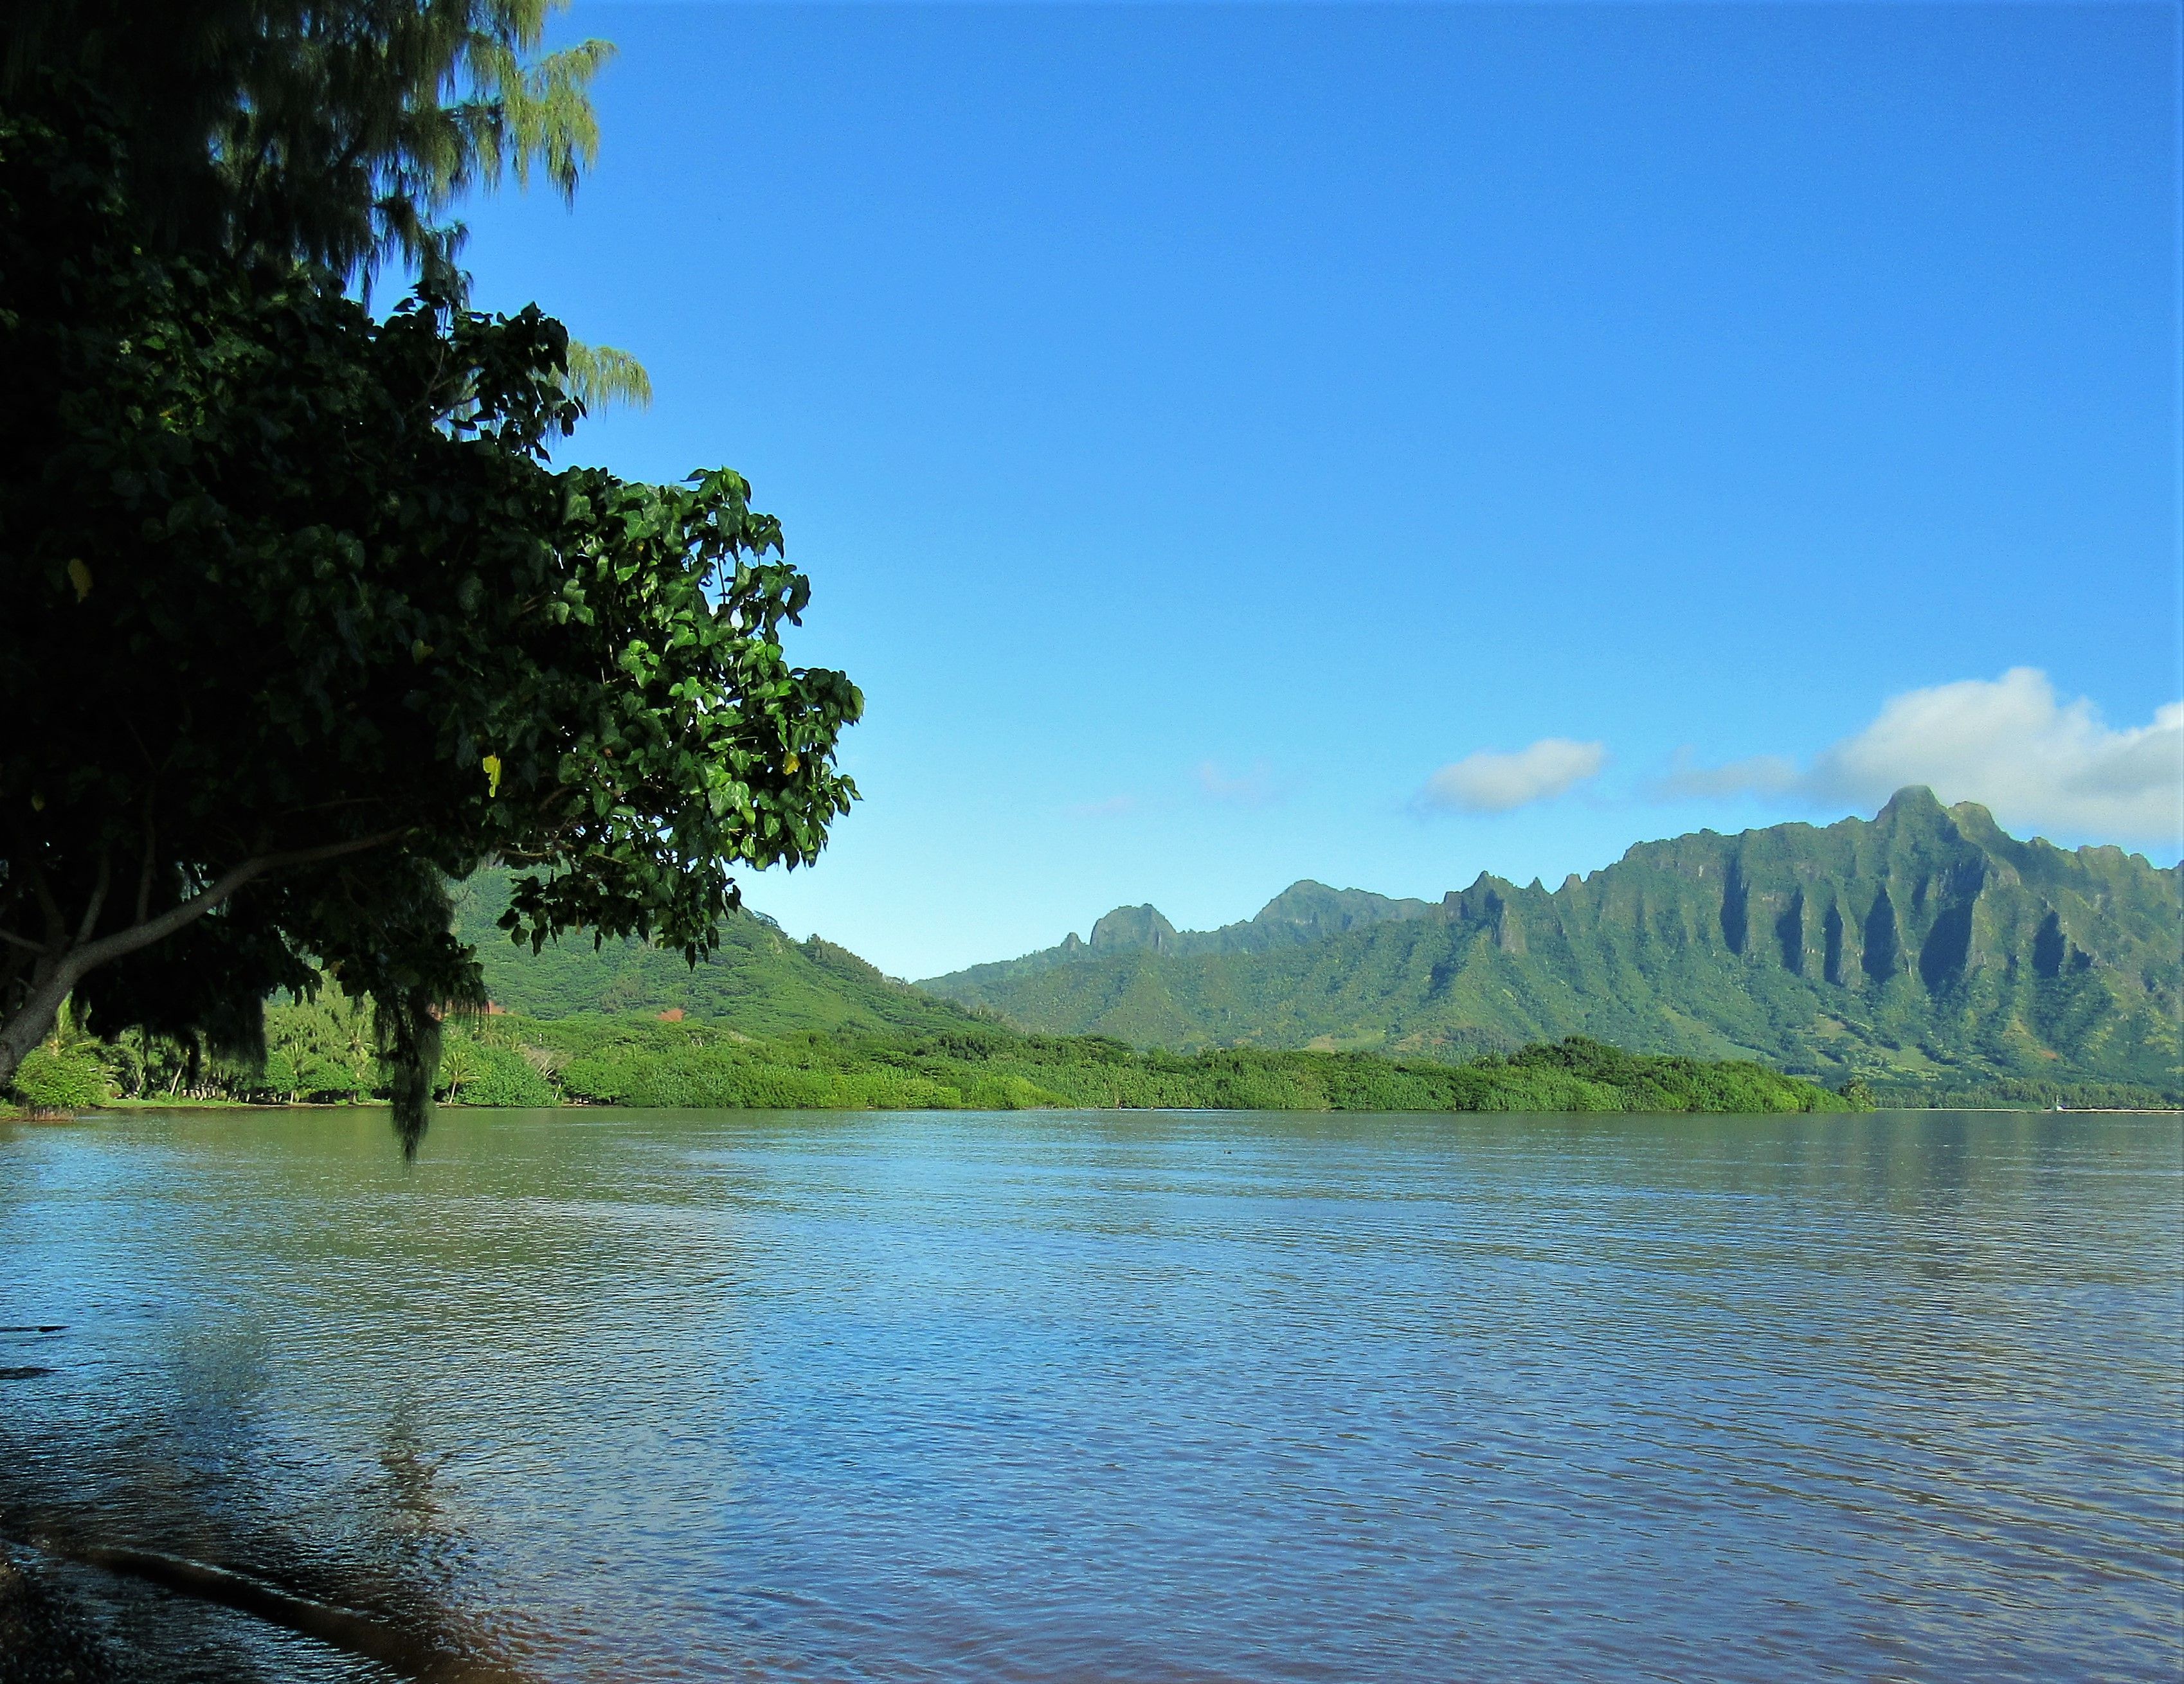 <p>Kahalu’u offers residents a mixed suburban and rural setting. The slow-paced town is only 30 minutes from Honolulu and access to big-city resources like shopping and hospitals. Nearly 22% of the population here is 65 or older.</p><ul><li>Population: 5,241</li><li>Median Household Income: $123,718</li><li>Cost of Living: 128% of U.S. average</li><li>Median Rent Price: $3,000</li><li>Home Price-to-Income Ratio: N/A</li><li>Average Property Tax: 0.32%</li></ul><p class="padding-top-ms u-margin-bottom-ms"><b>Housing Affordability: </b>Median rent prices in Kahalu’u are $3,000 per month, significantly higher than the national average. This small census-designated place shares a real estate market with neighboring Kaneohe. There are relatively few properties for sale here at any given time, but prices start at $600,000 and travel well north of $1,000,000.</p>